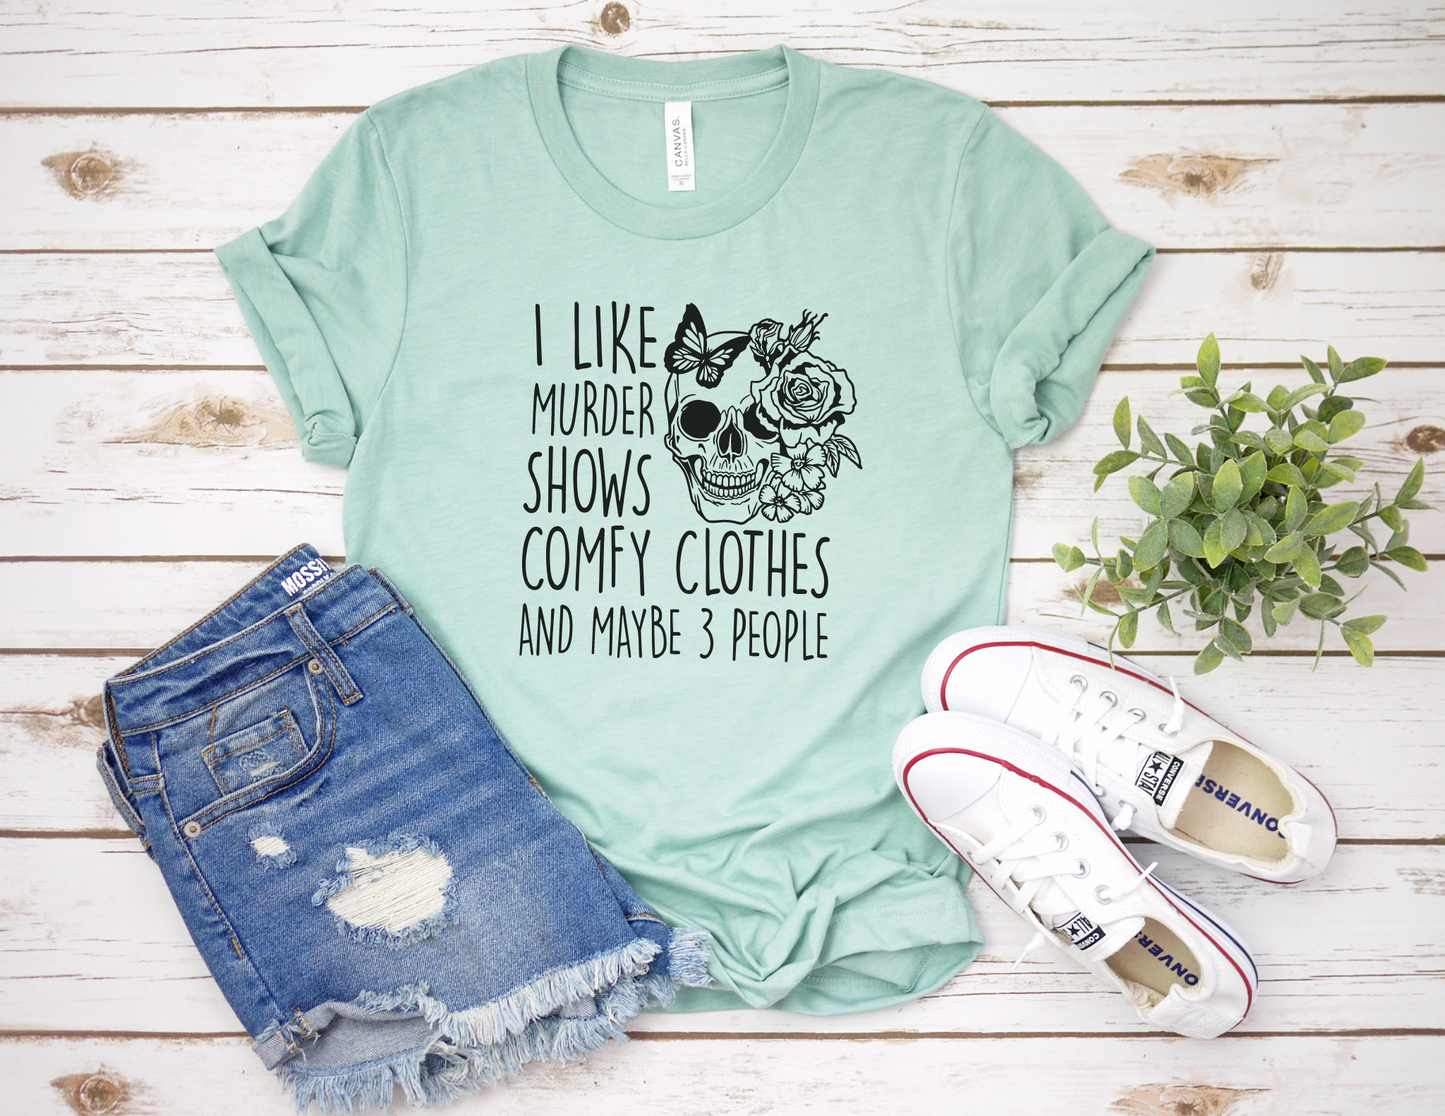 I like Murder Shows and Comfy Clothes T-Shirt